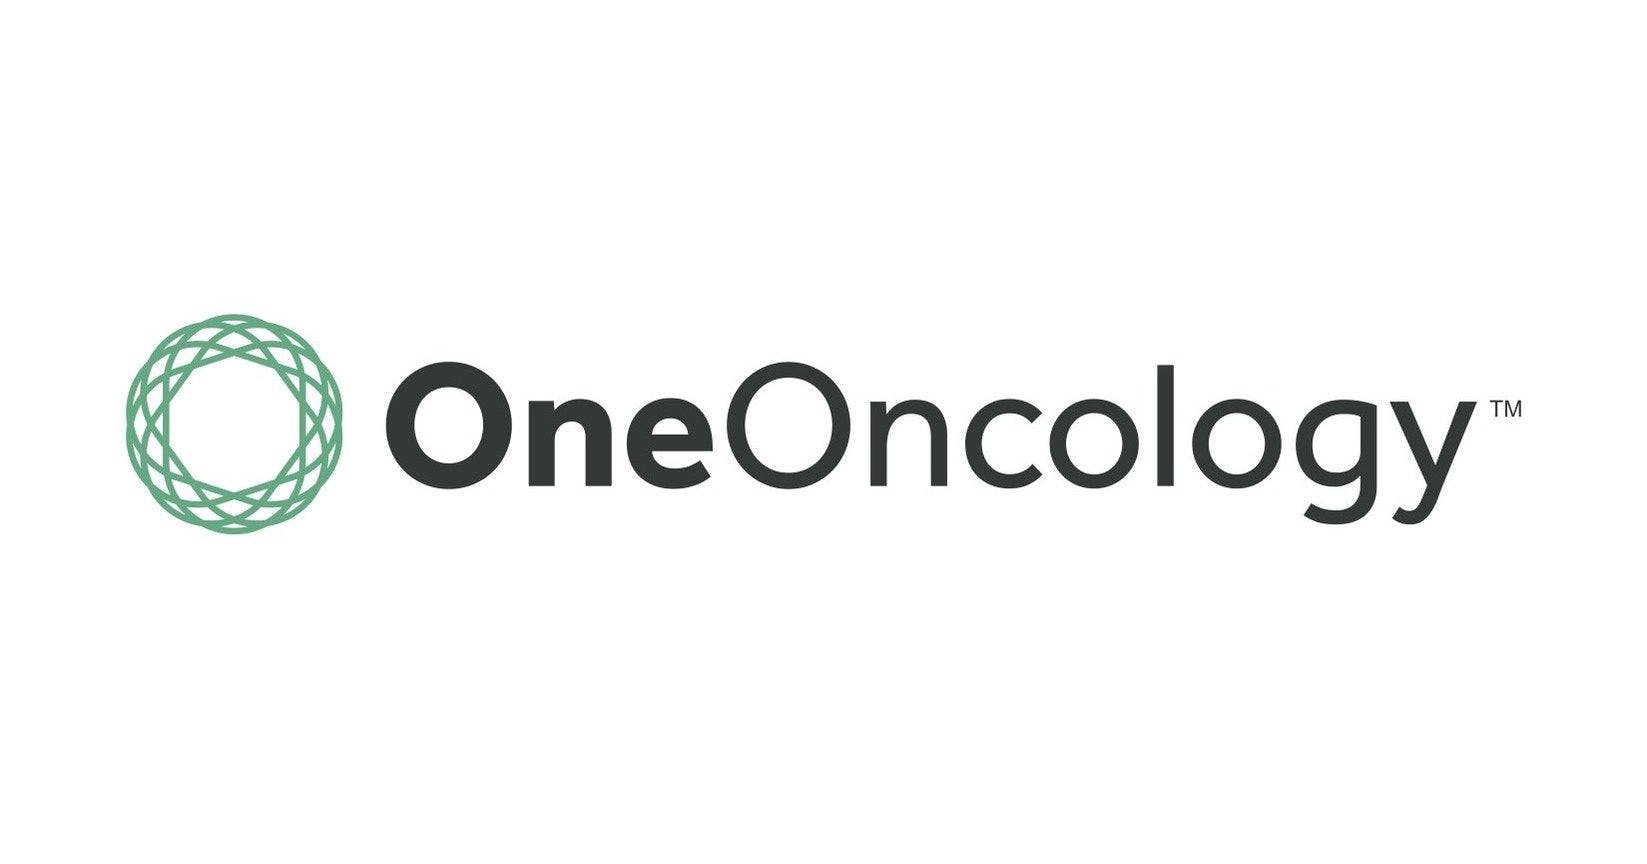 All 14 OneOncology Practices Apply for EOM